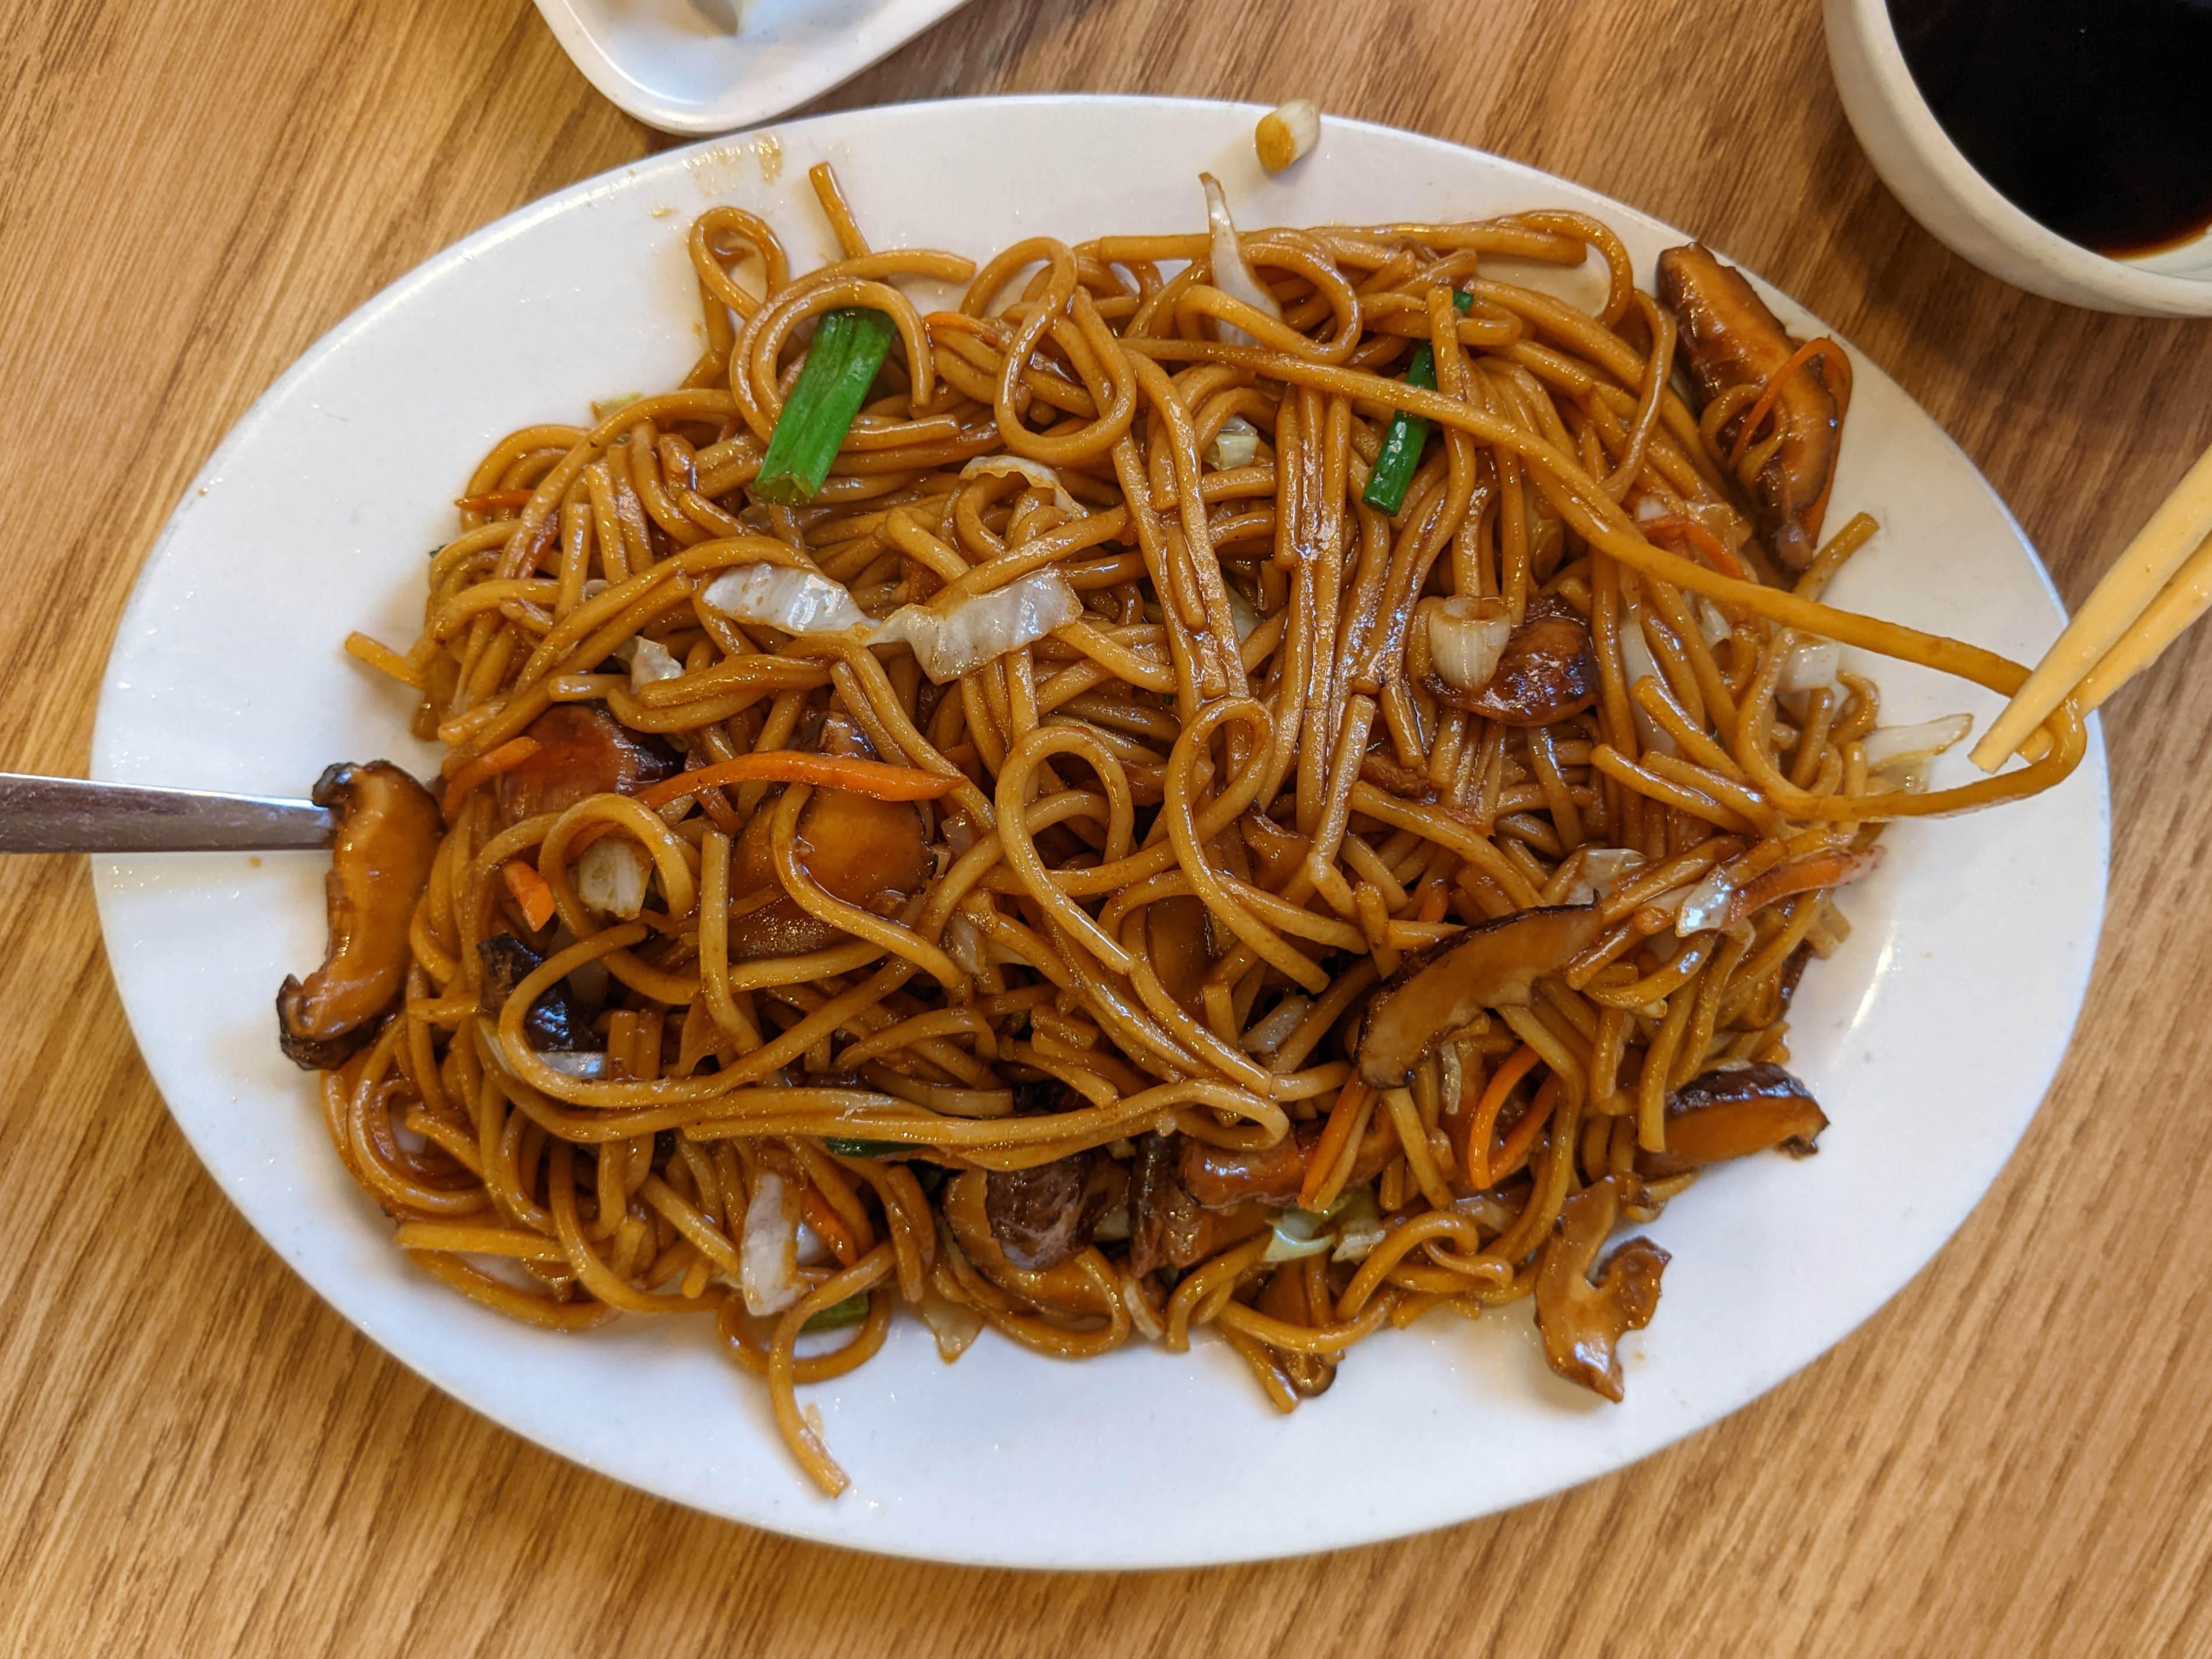 On a wooden table, there is a white plate full of mushroom chow mein. Photo by Tayler Neumann.